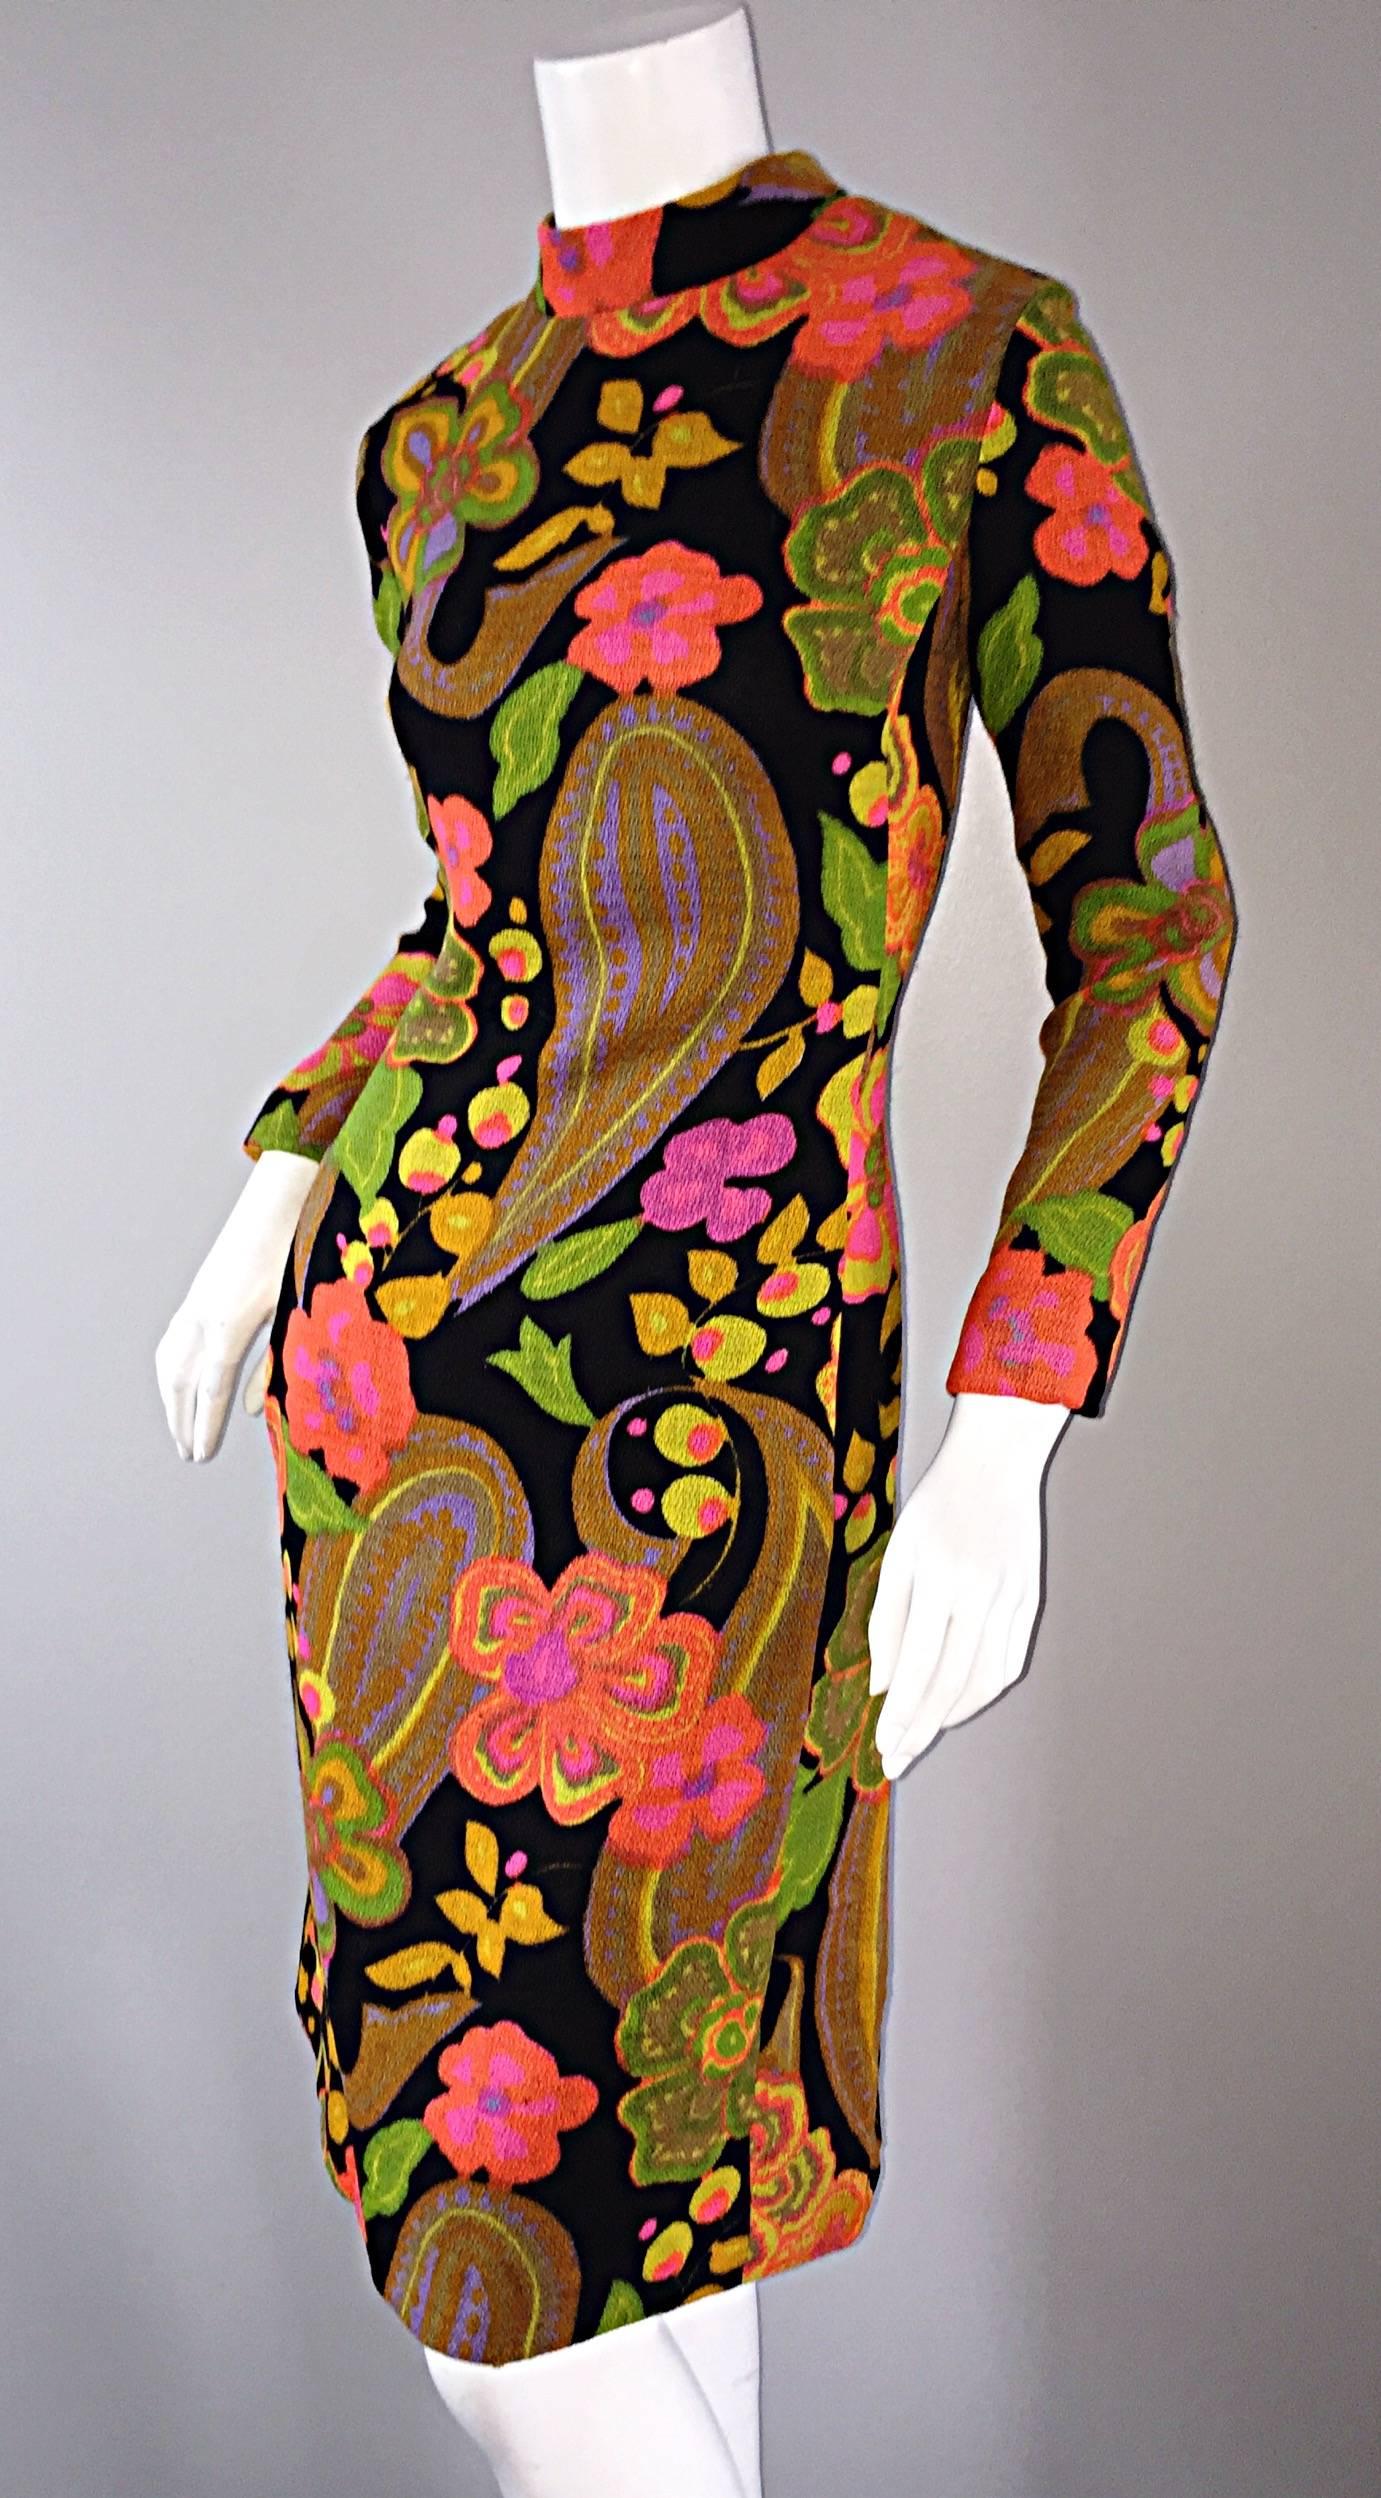 1960s 60s Psychedelic Flowers + Paisley Colorful Print Mod Retro A - Line Dress In Excellent Condition For Sale In San Diego, CA